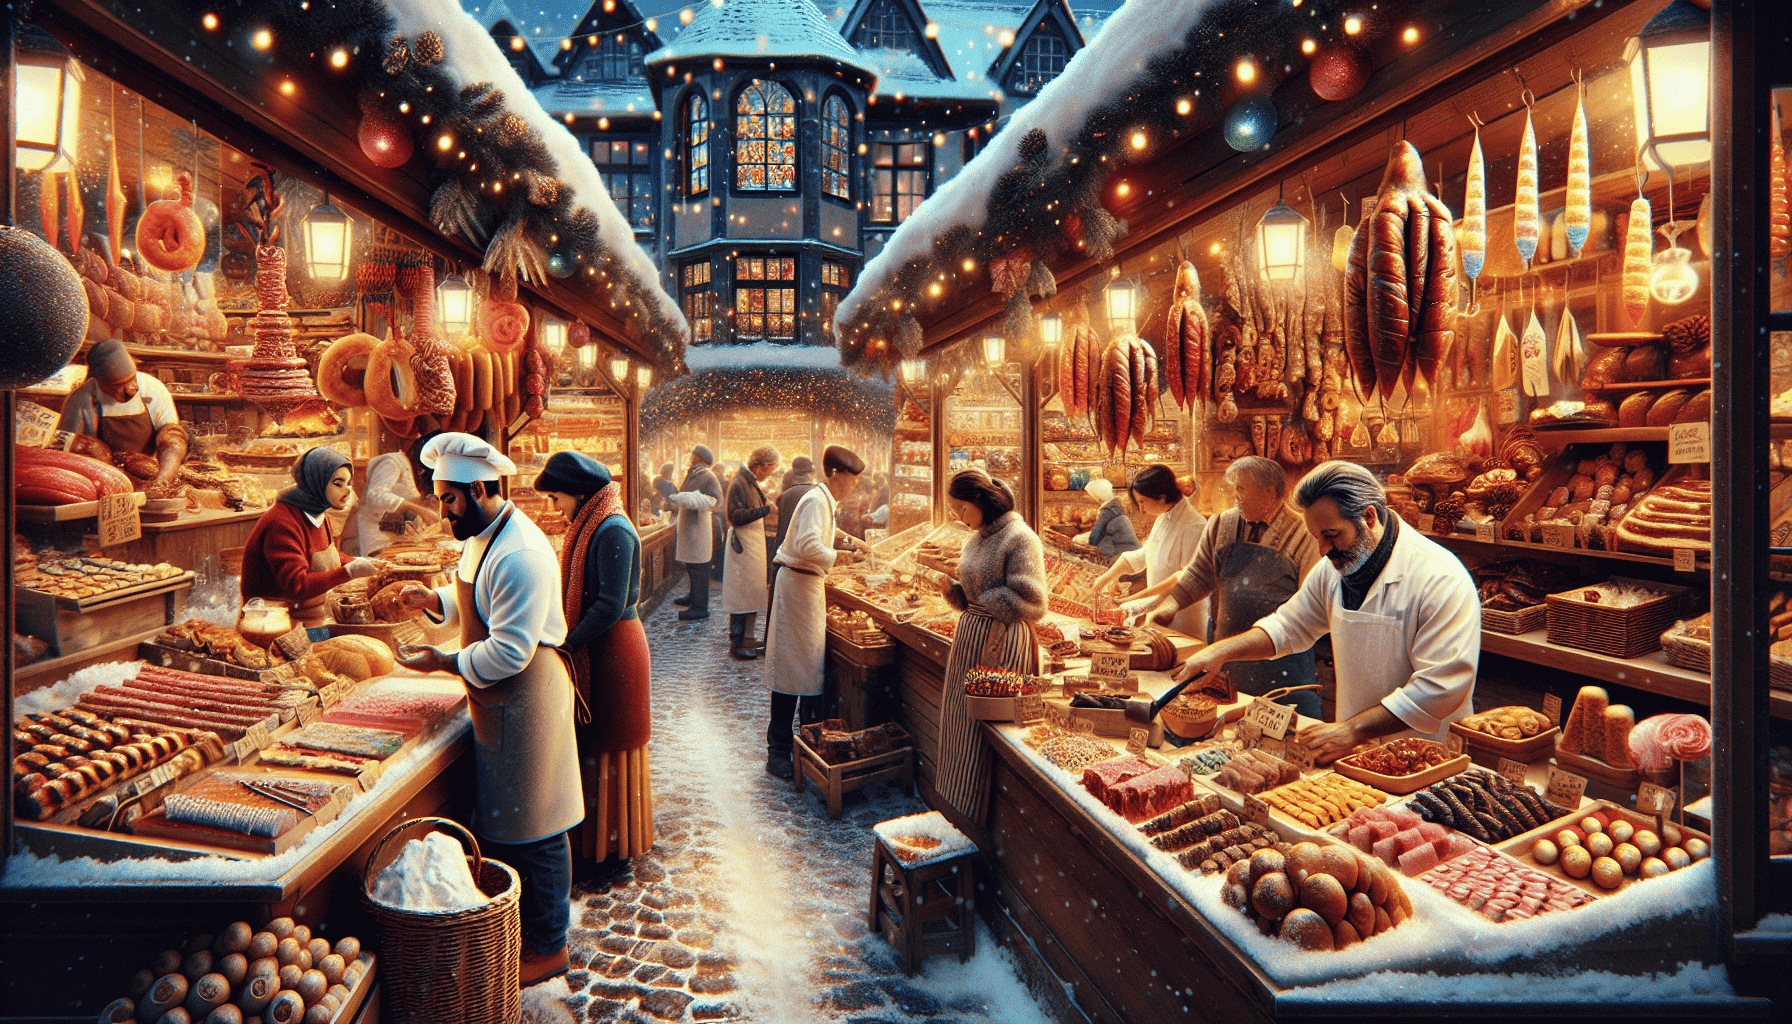 Artisan food stalls with international flavors at the Christmas Market